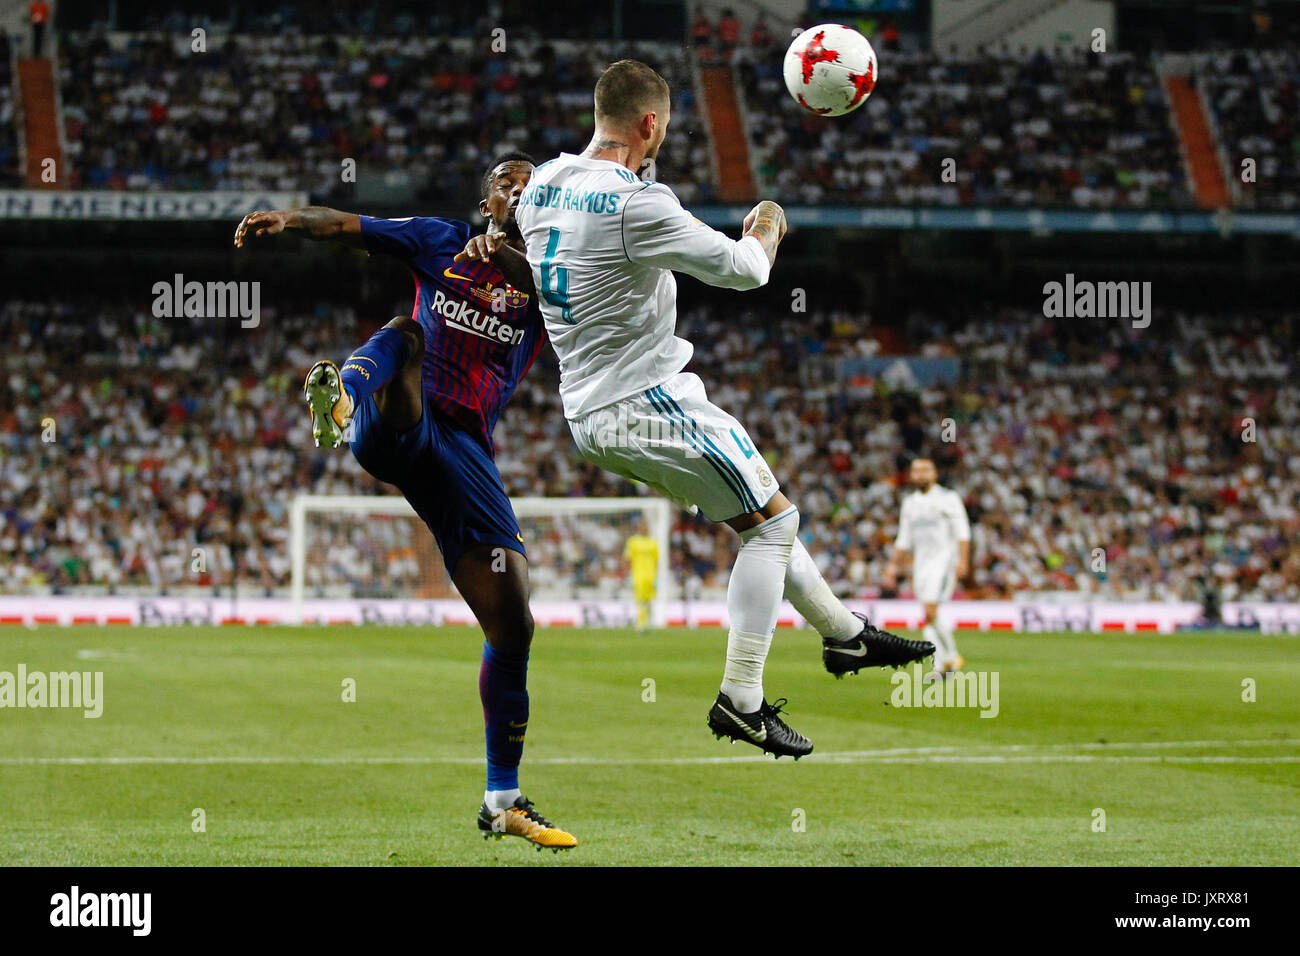 Madrid, Spain. 16th Aug, 2017. Samuel Umtiti (23) FC Barcelona's player. Sergio Ramos Garcia (4) Real Madrid's player.SPANISH SUPER CUP between Real Madrid vs FC Barcelona at the Santiago Bernabeu stadium in Madrid, Spain, August 16, 2017 . Credit: Gtres Información más Comuniación on line,S.L./Alamy Live News Stock Photo